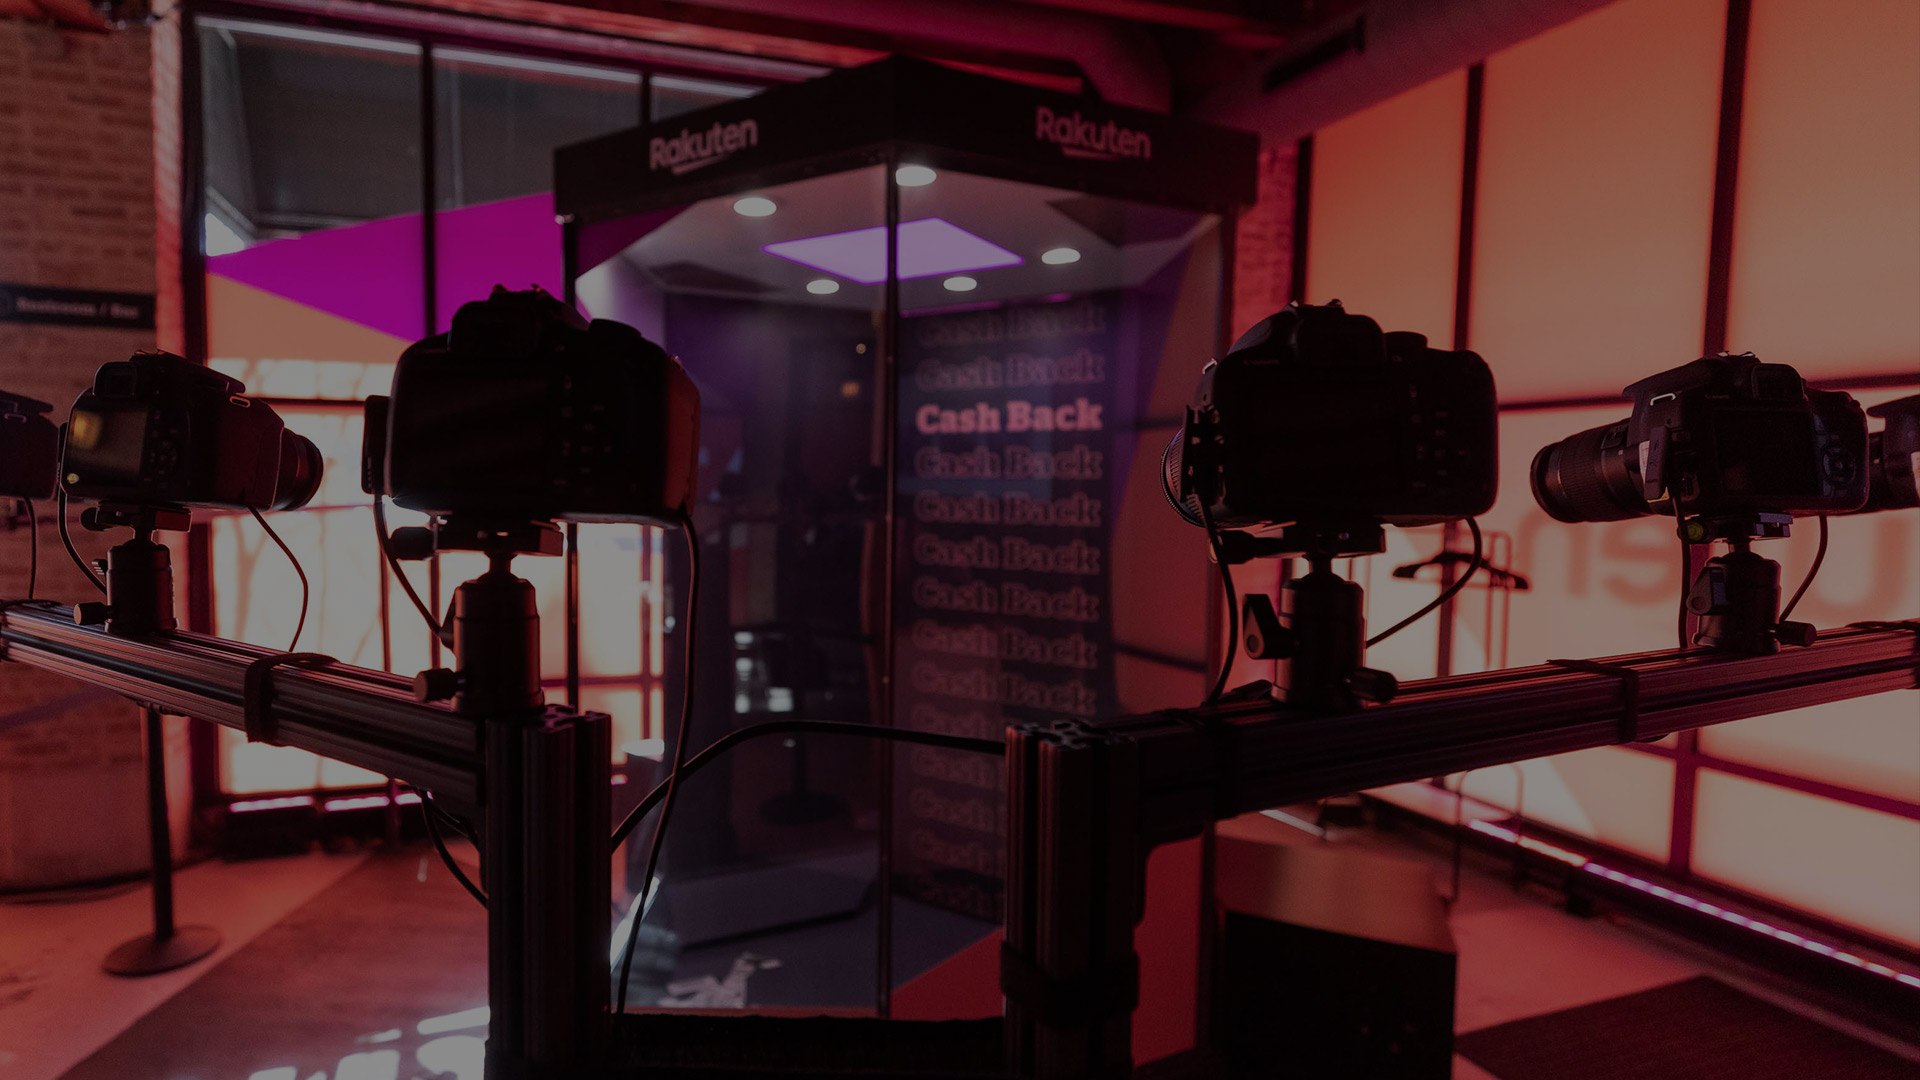 Multiple cameras are setup to record people in the cash machine 